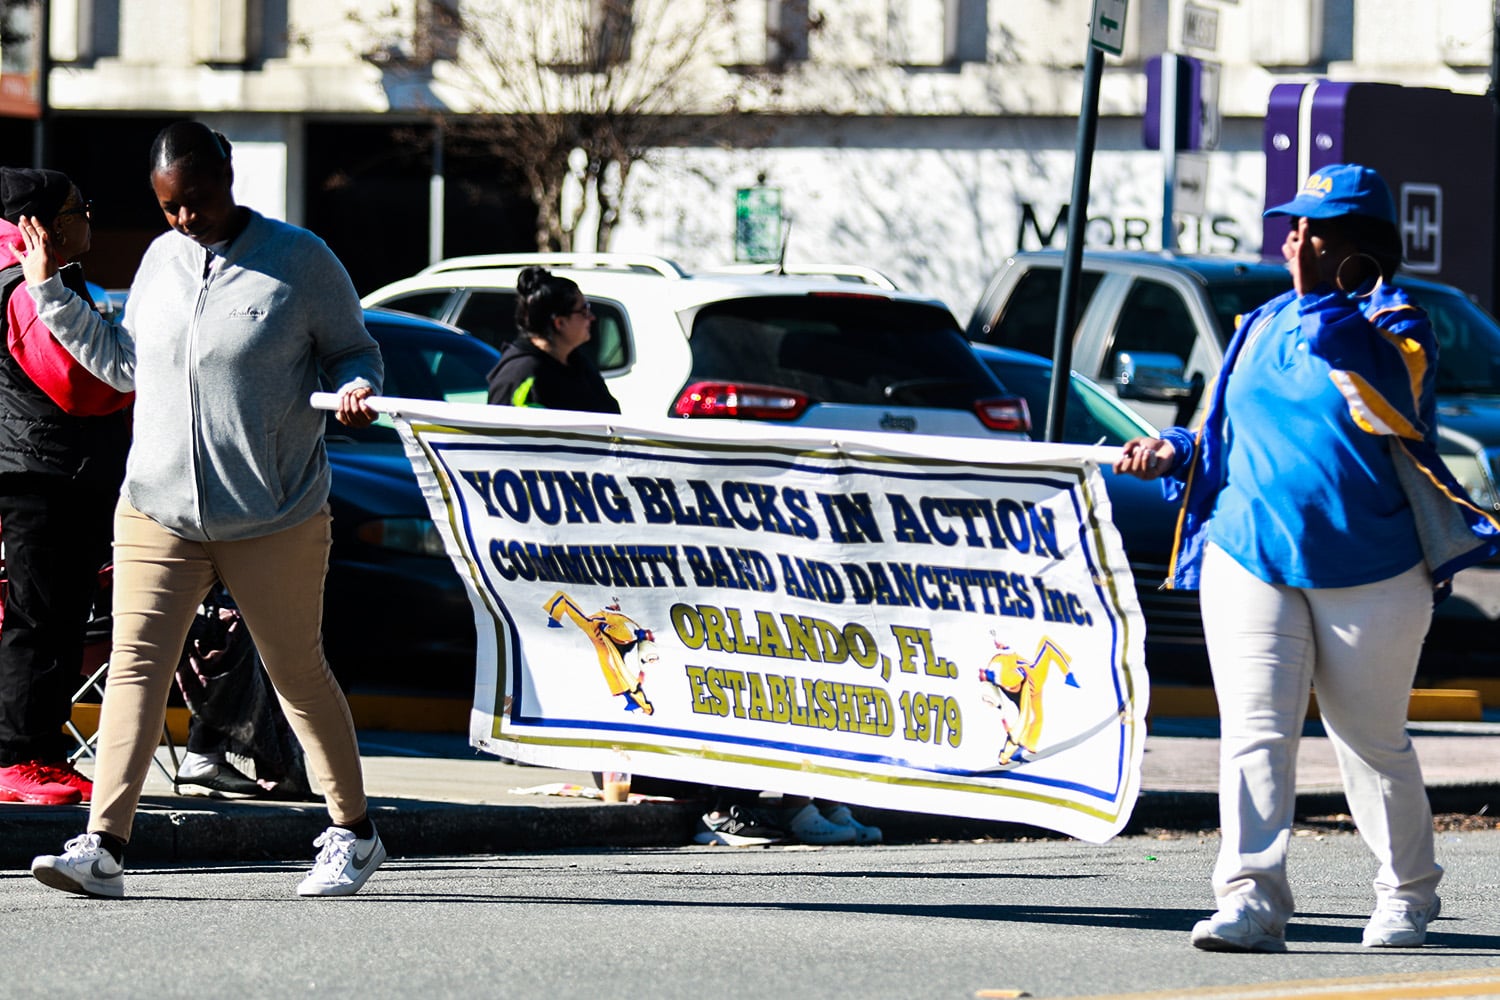 Young Blacks in Action Community Band and Dancettes Inc. Orlando, Fl. Established 1979. Photo by Cheryl Clanton